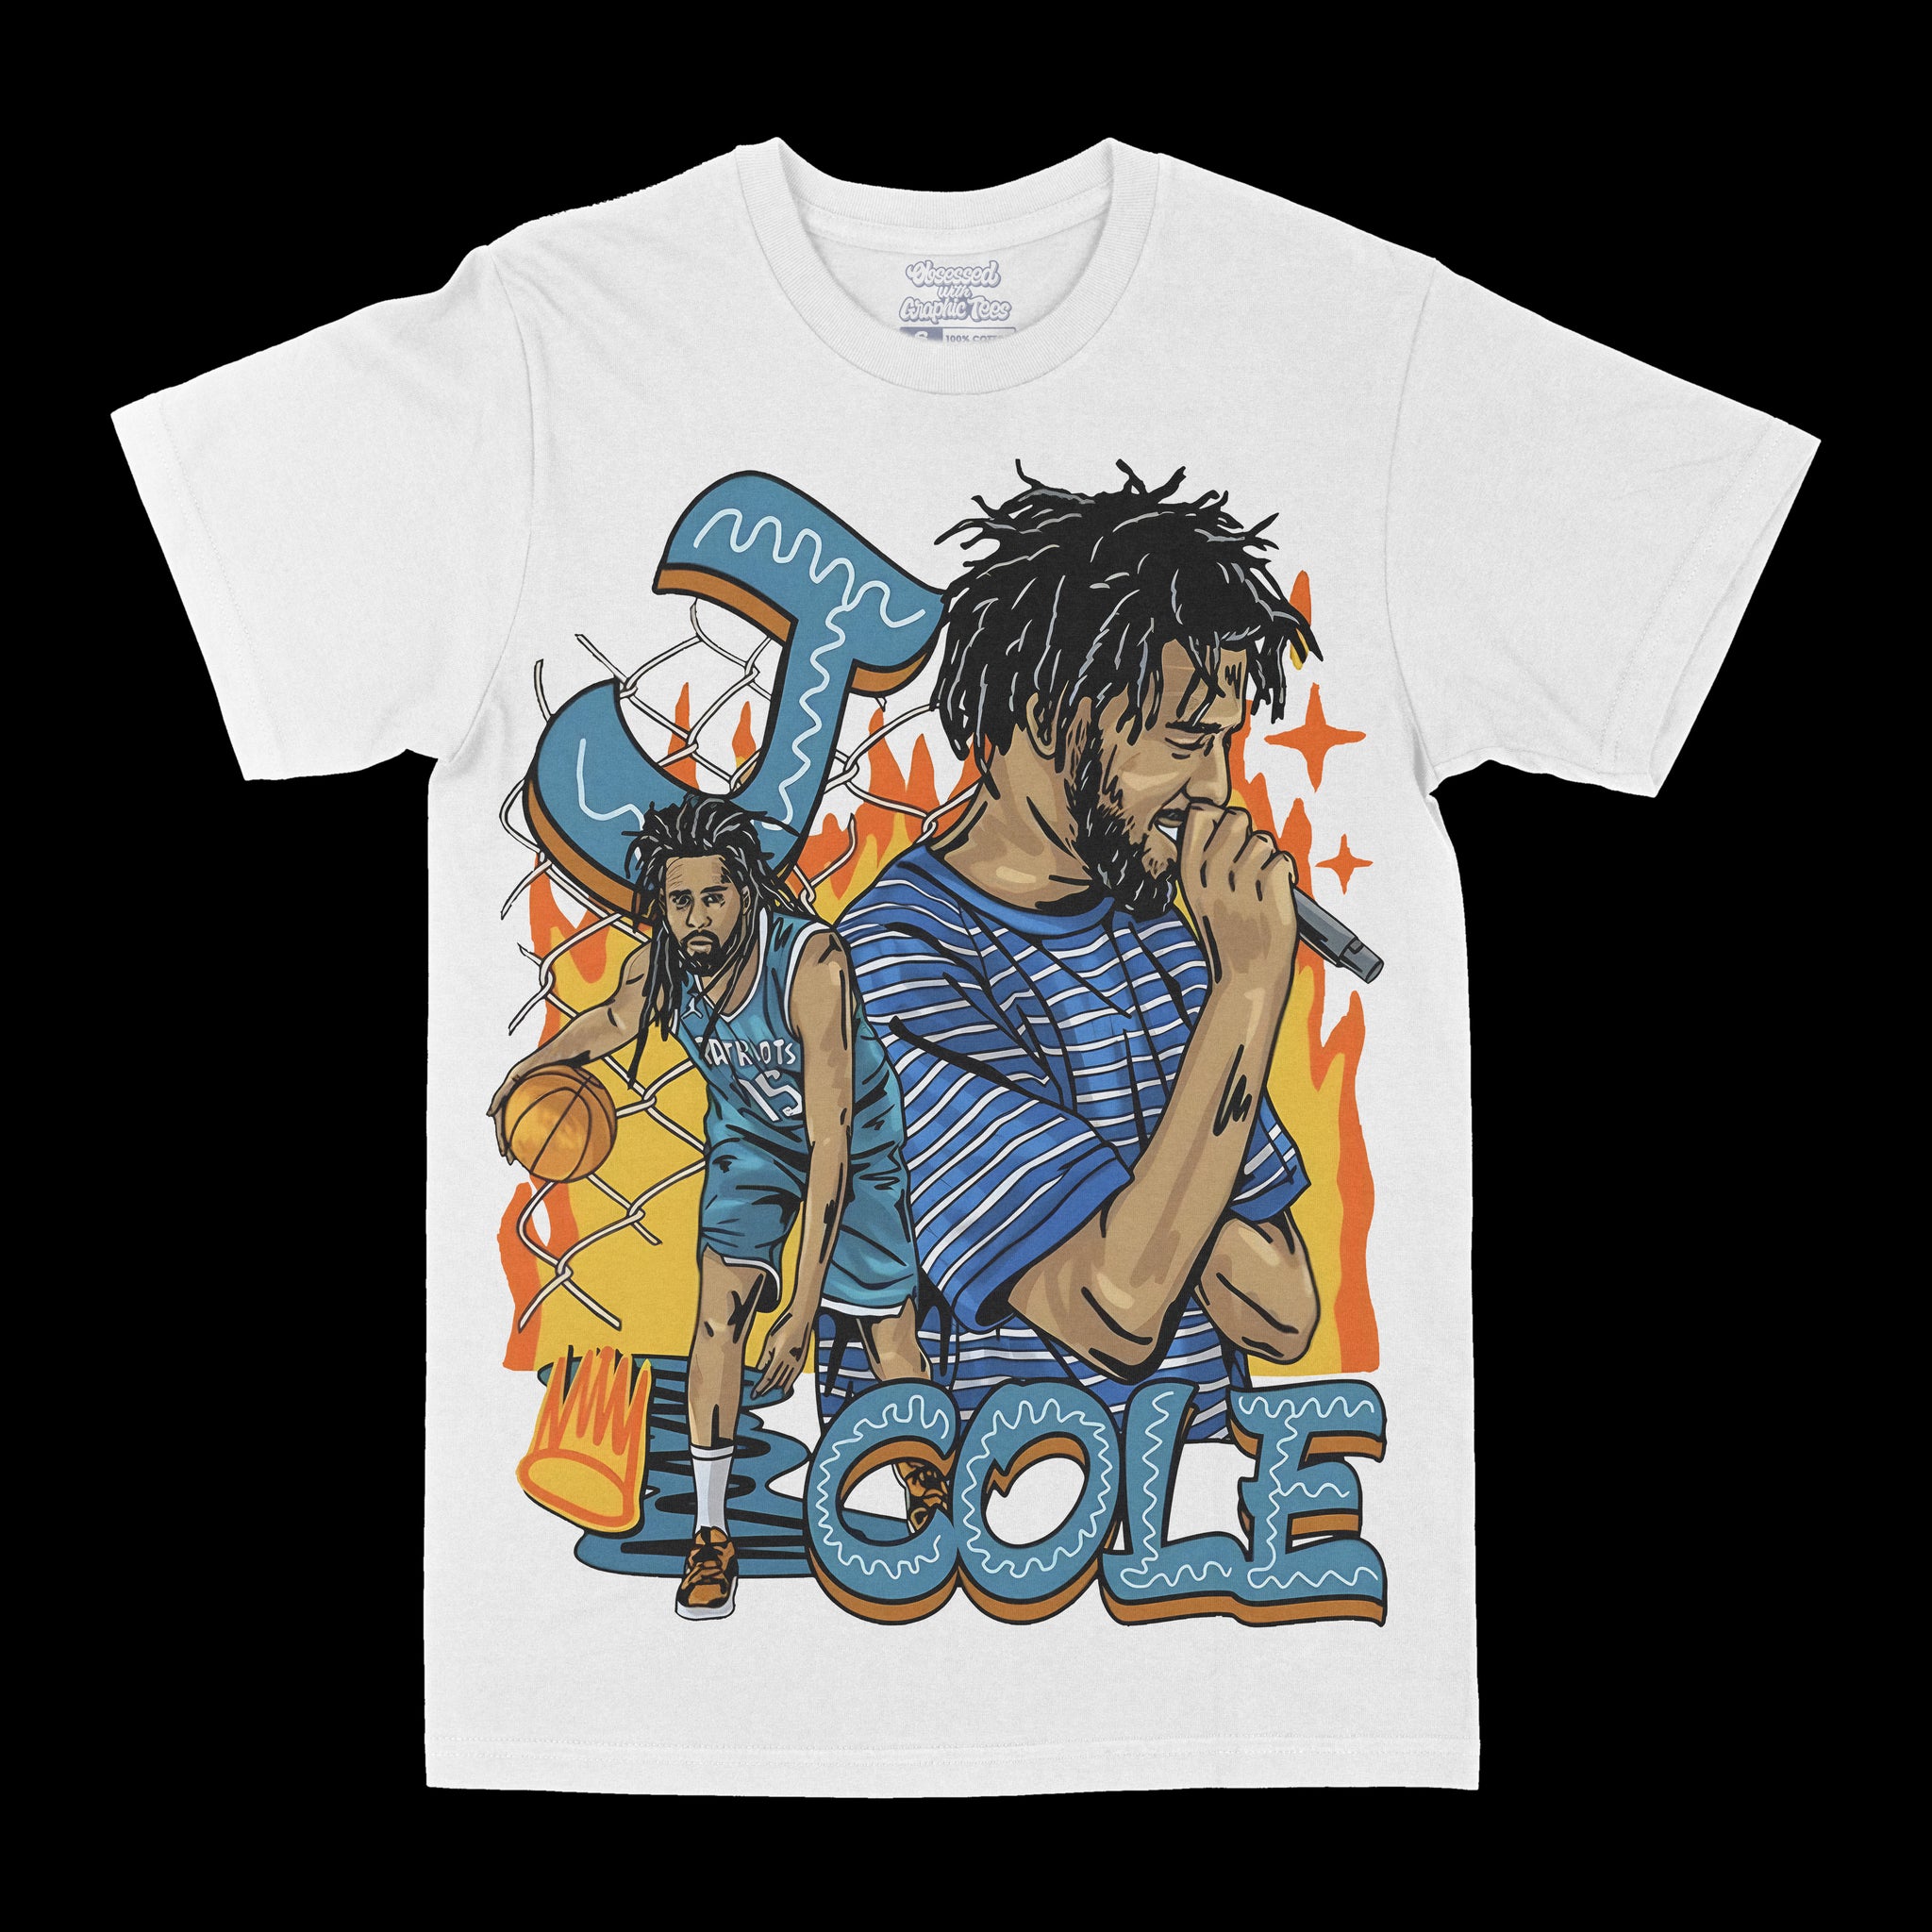 J. Cole "Fire" Graphic Tee